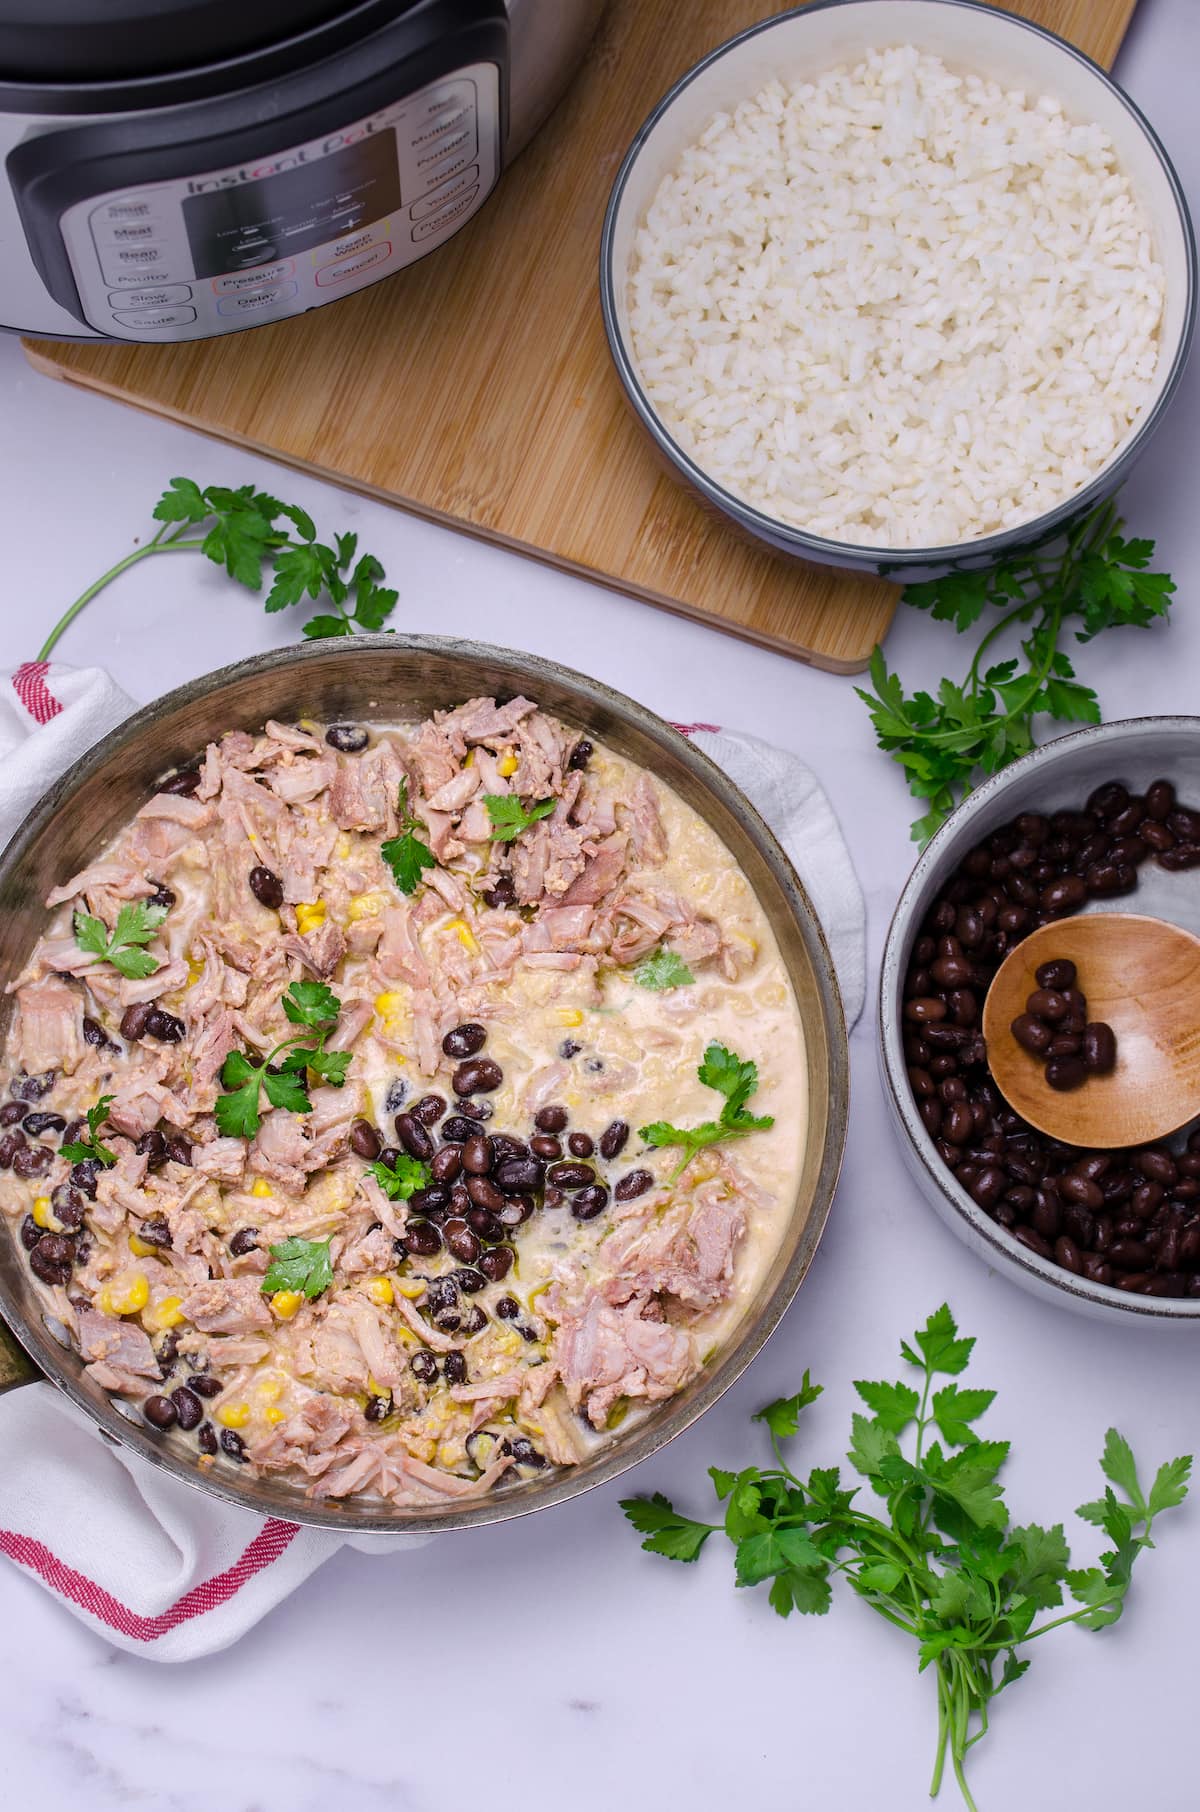 Overhead view of a bowl of Southwest shredded pork over rice